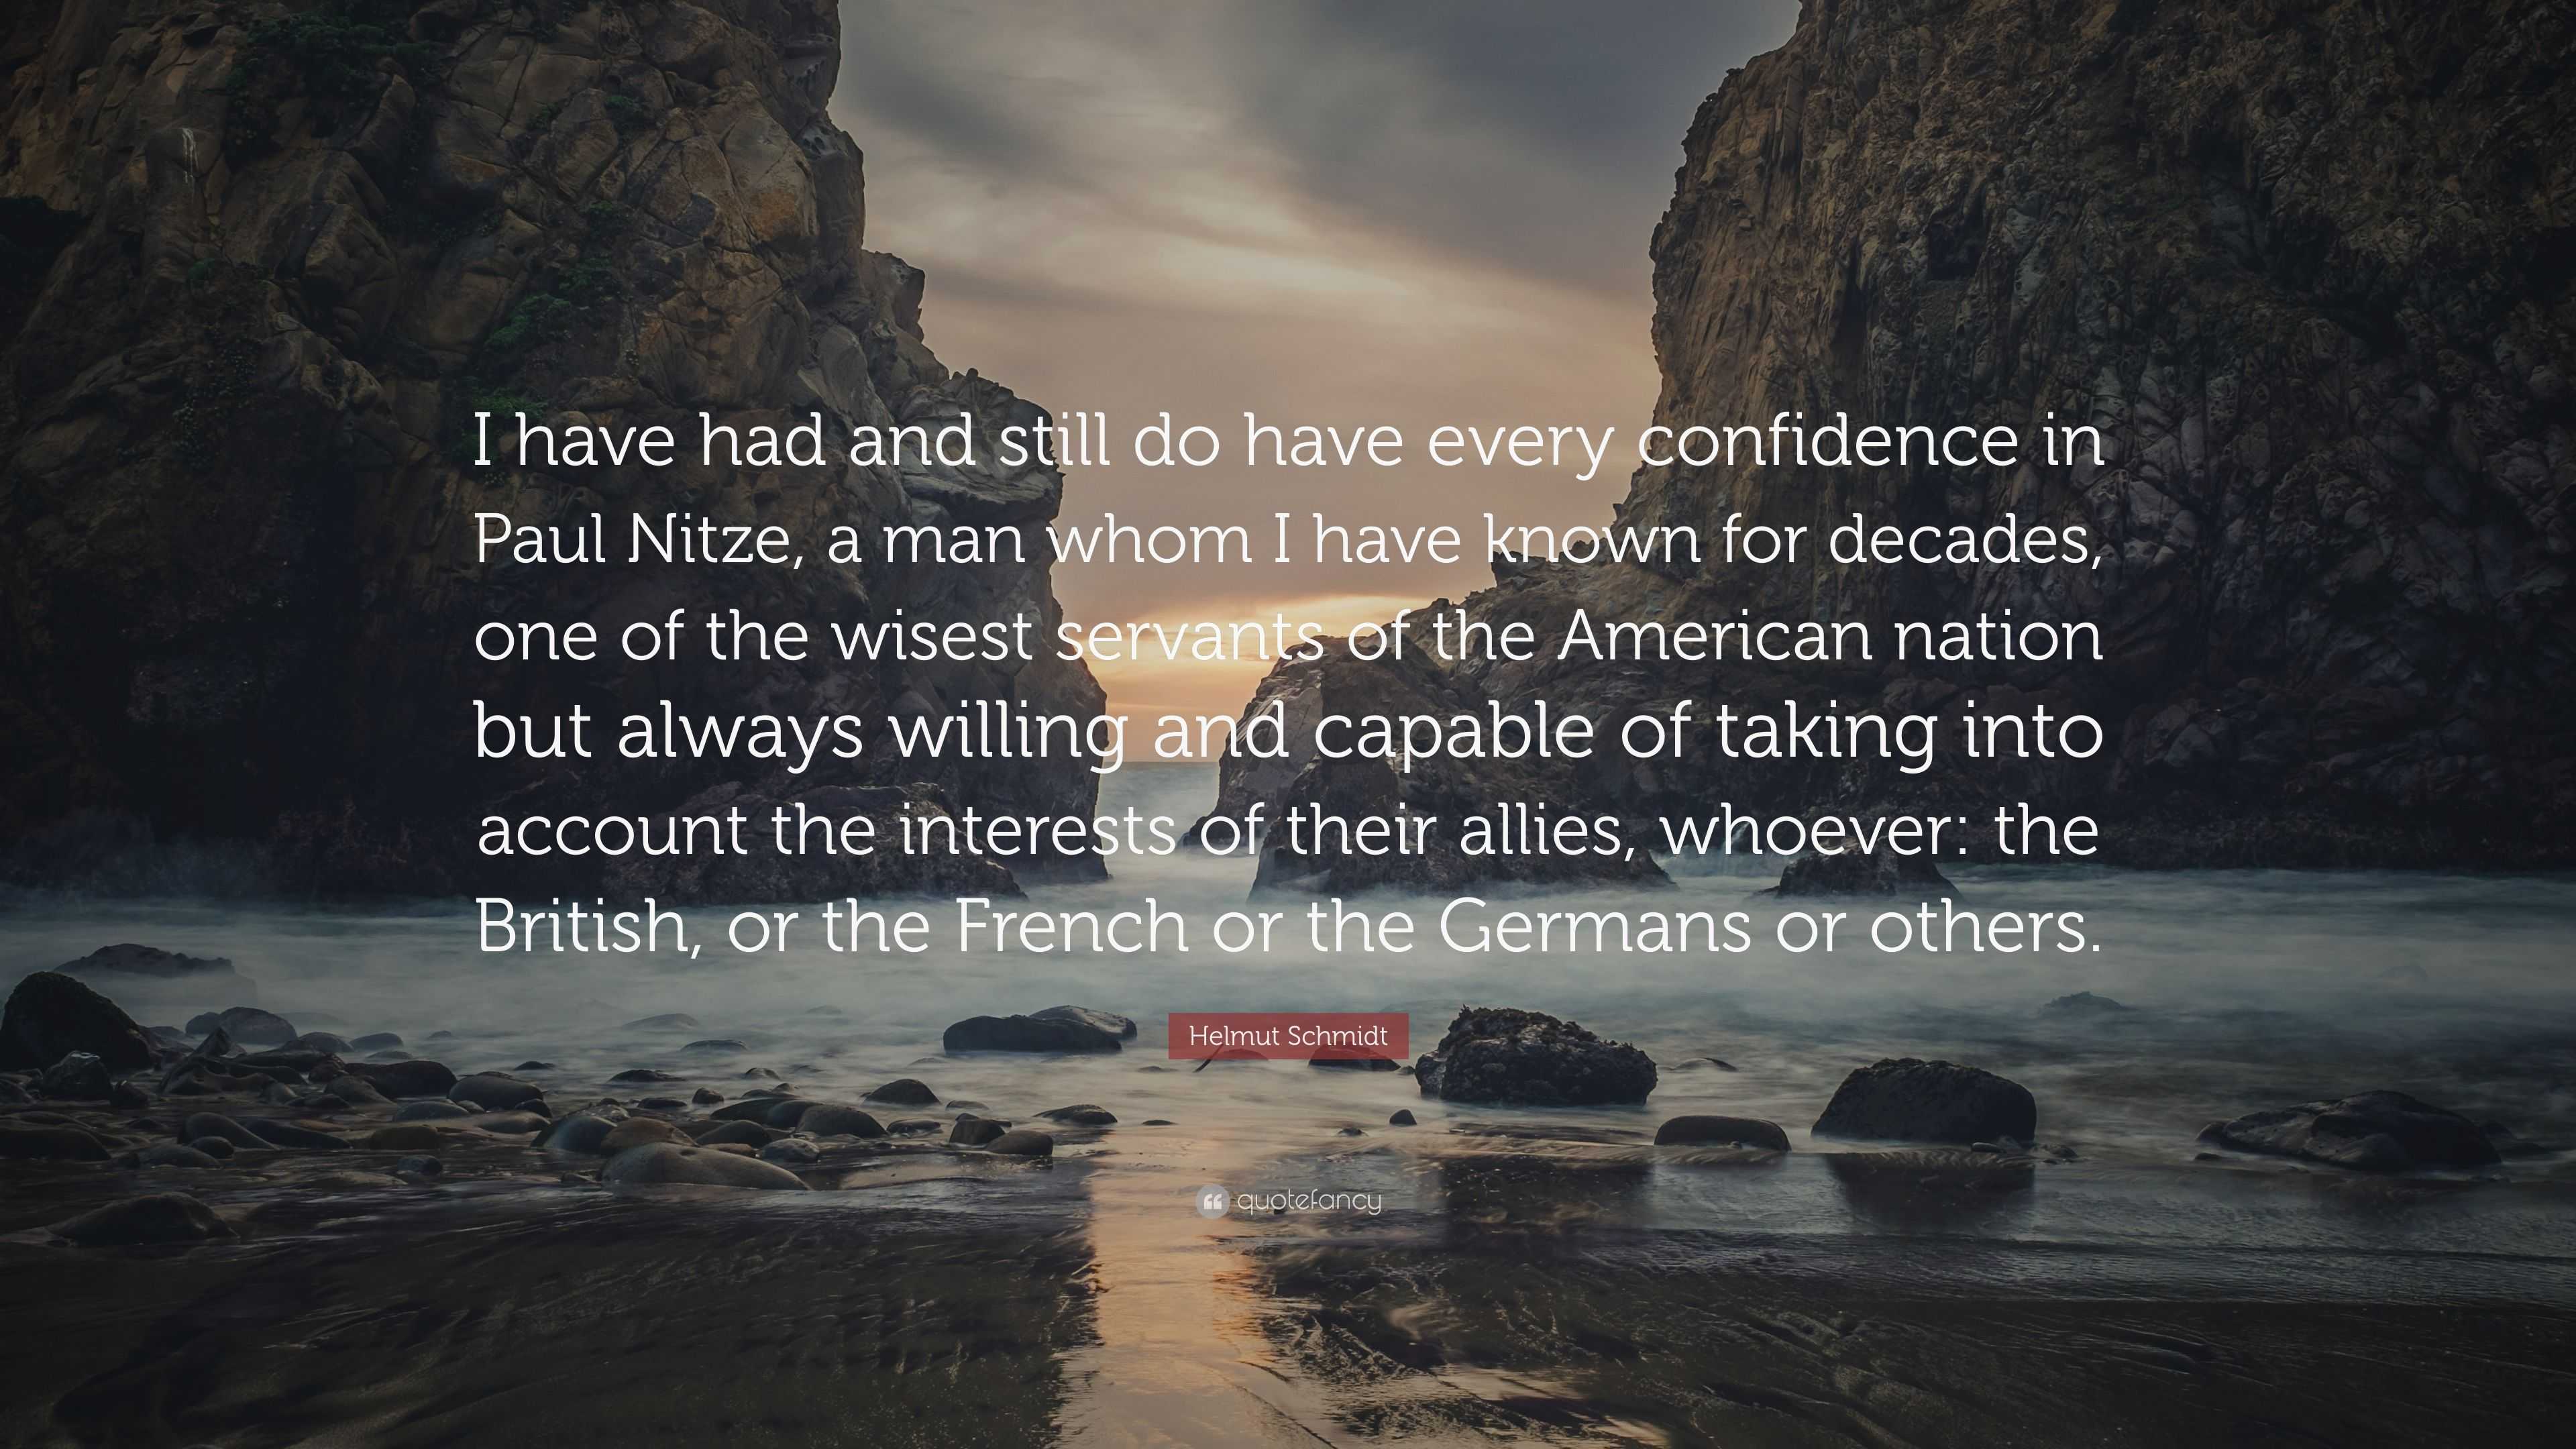 Helmut Schmidt Quote: “I have had and still do have every confidence in ...